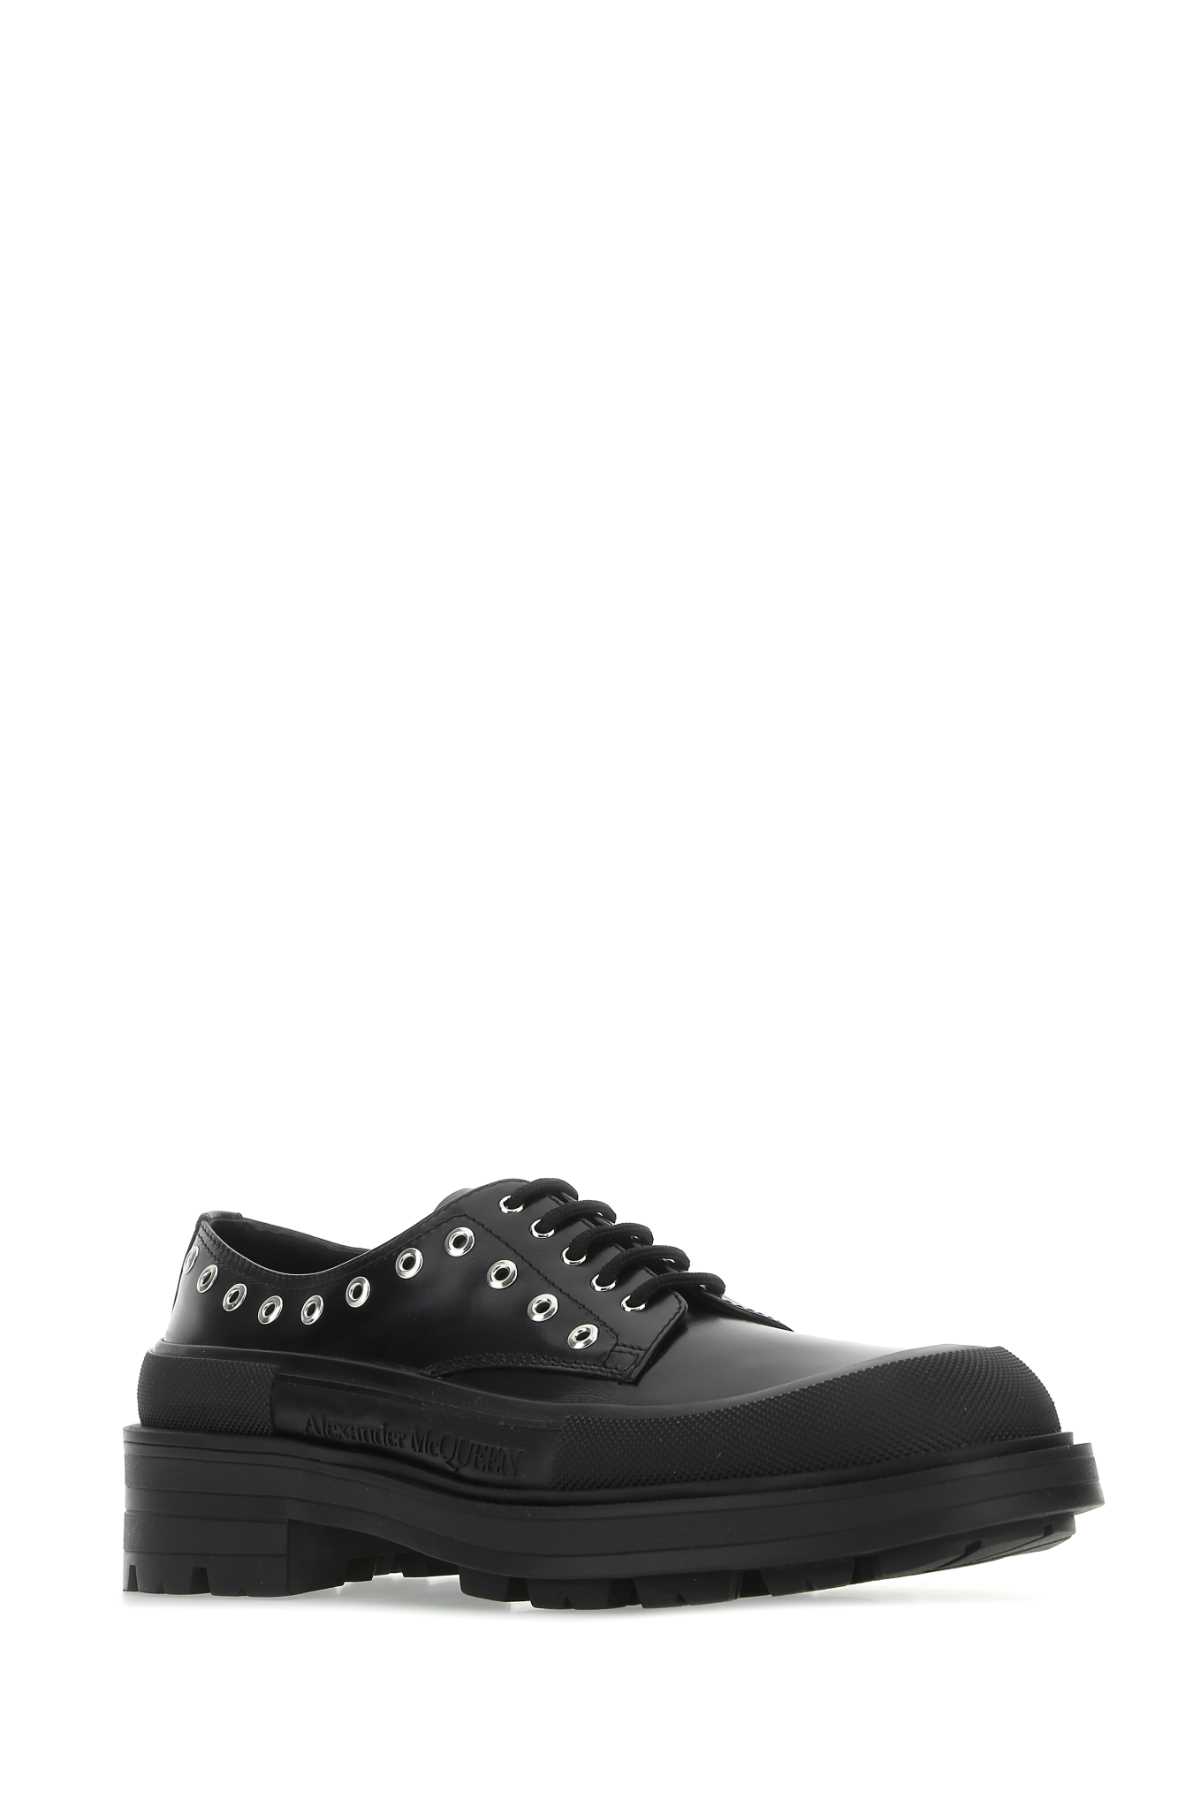 Alexander Mcqueen Black Leather Lace-up Shoes In 1081